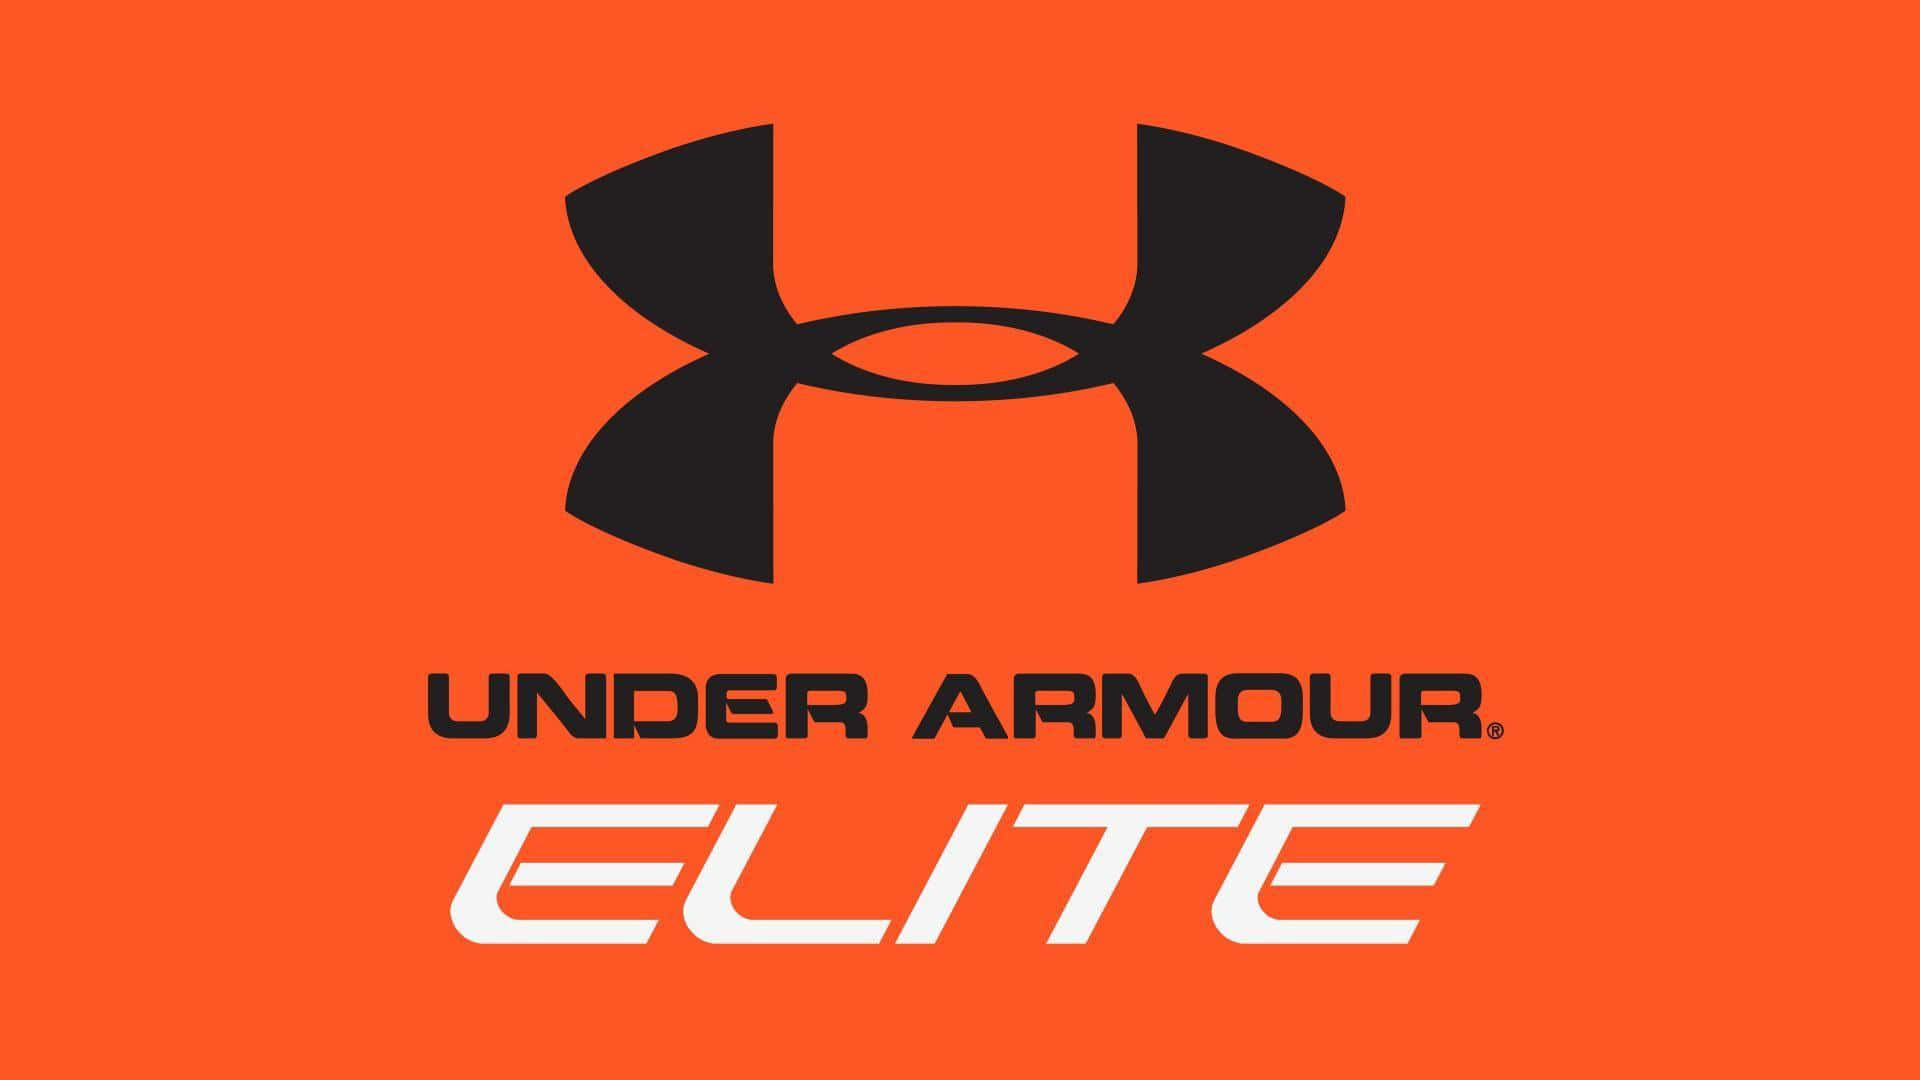 Get Ready to Play Hard in Under Armour